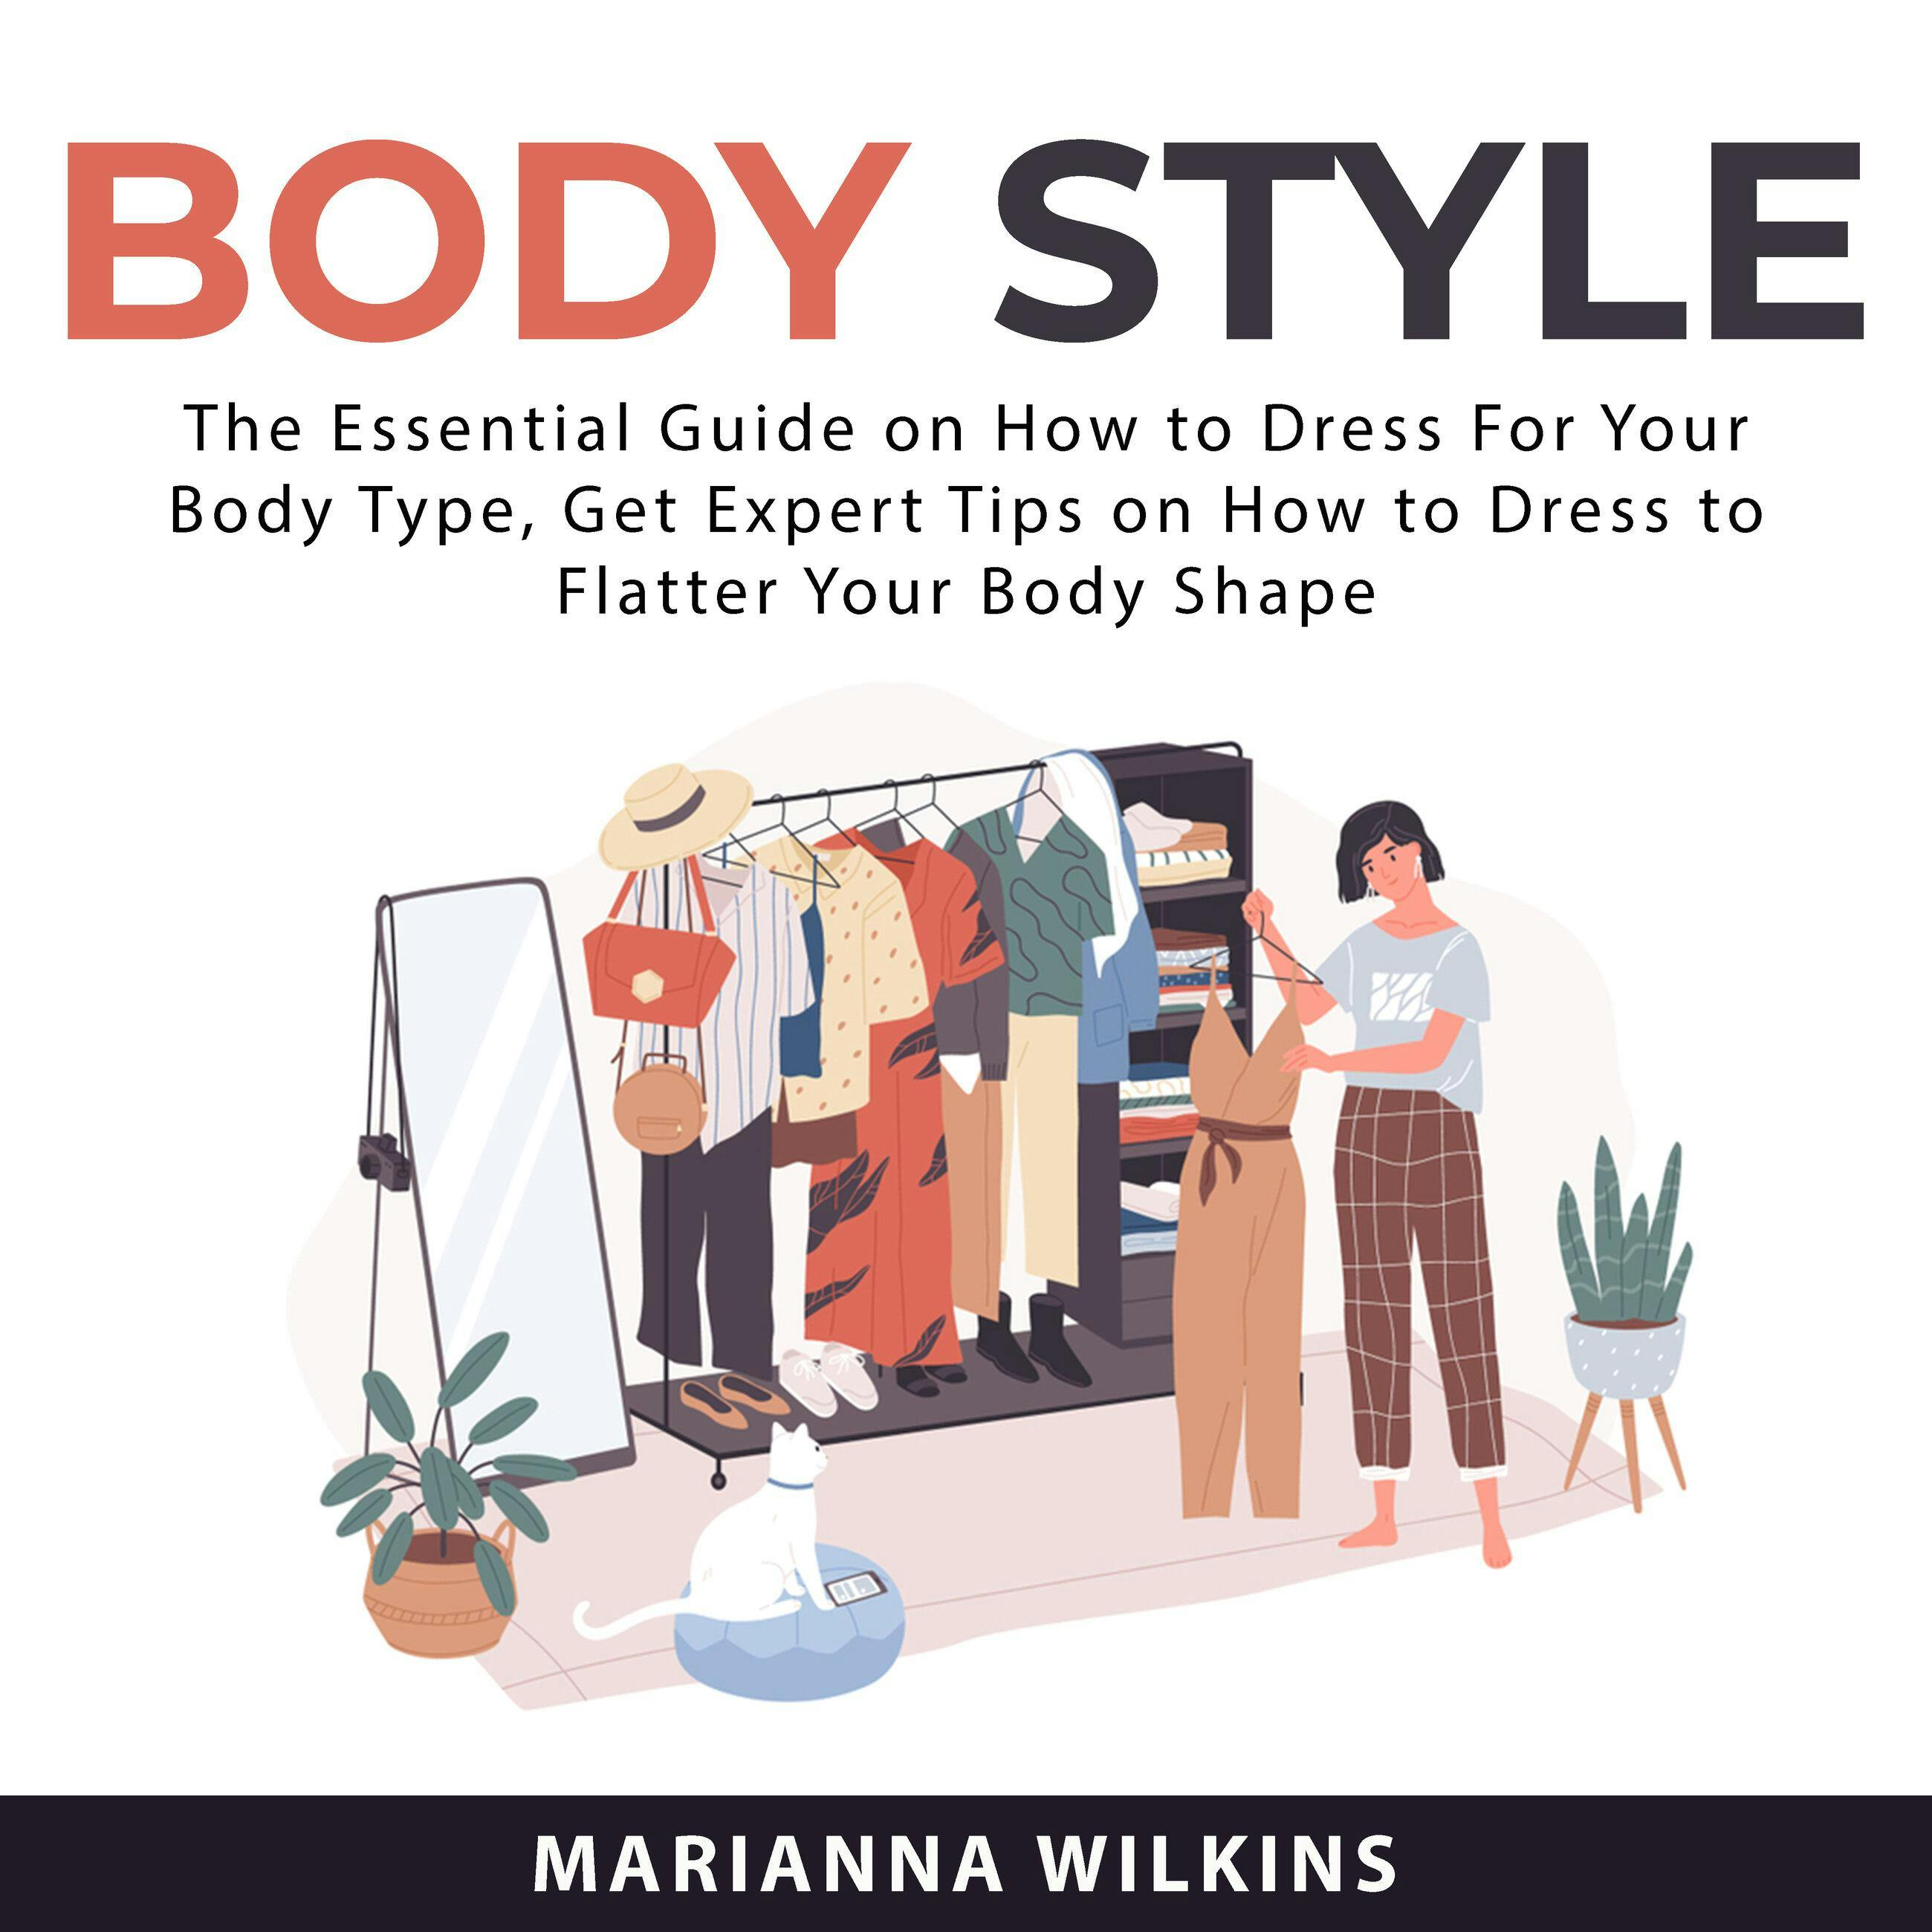 Body Style: The Essential Guide on How to Dress For Your BodyType, Get Expert Tips on How to Dress to Flatter Your Body Shape - Marianna Wilkins